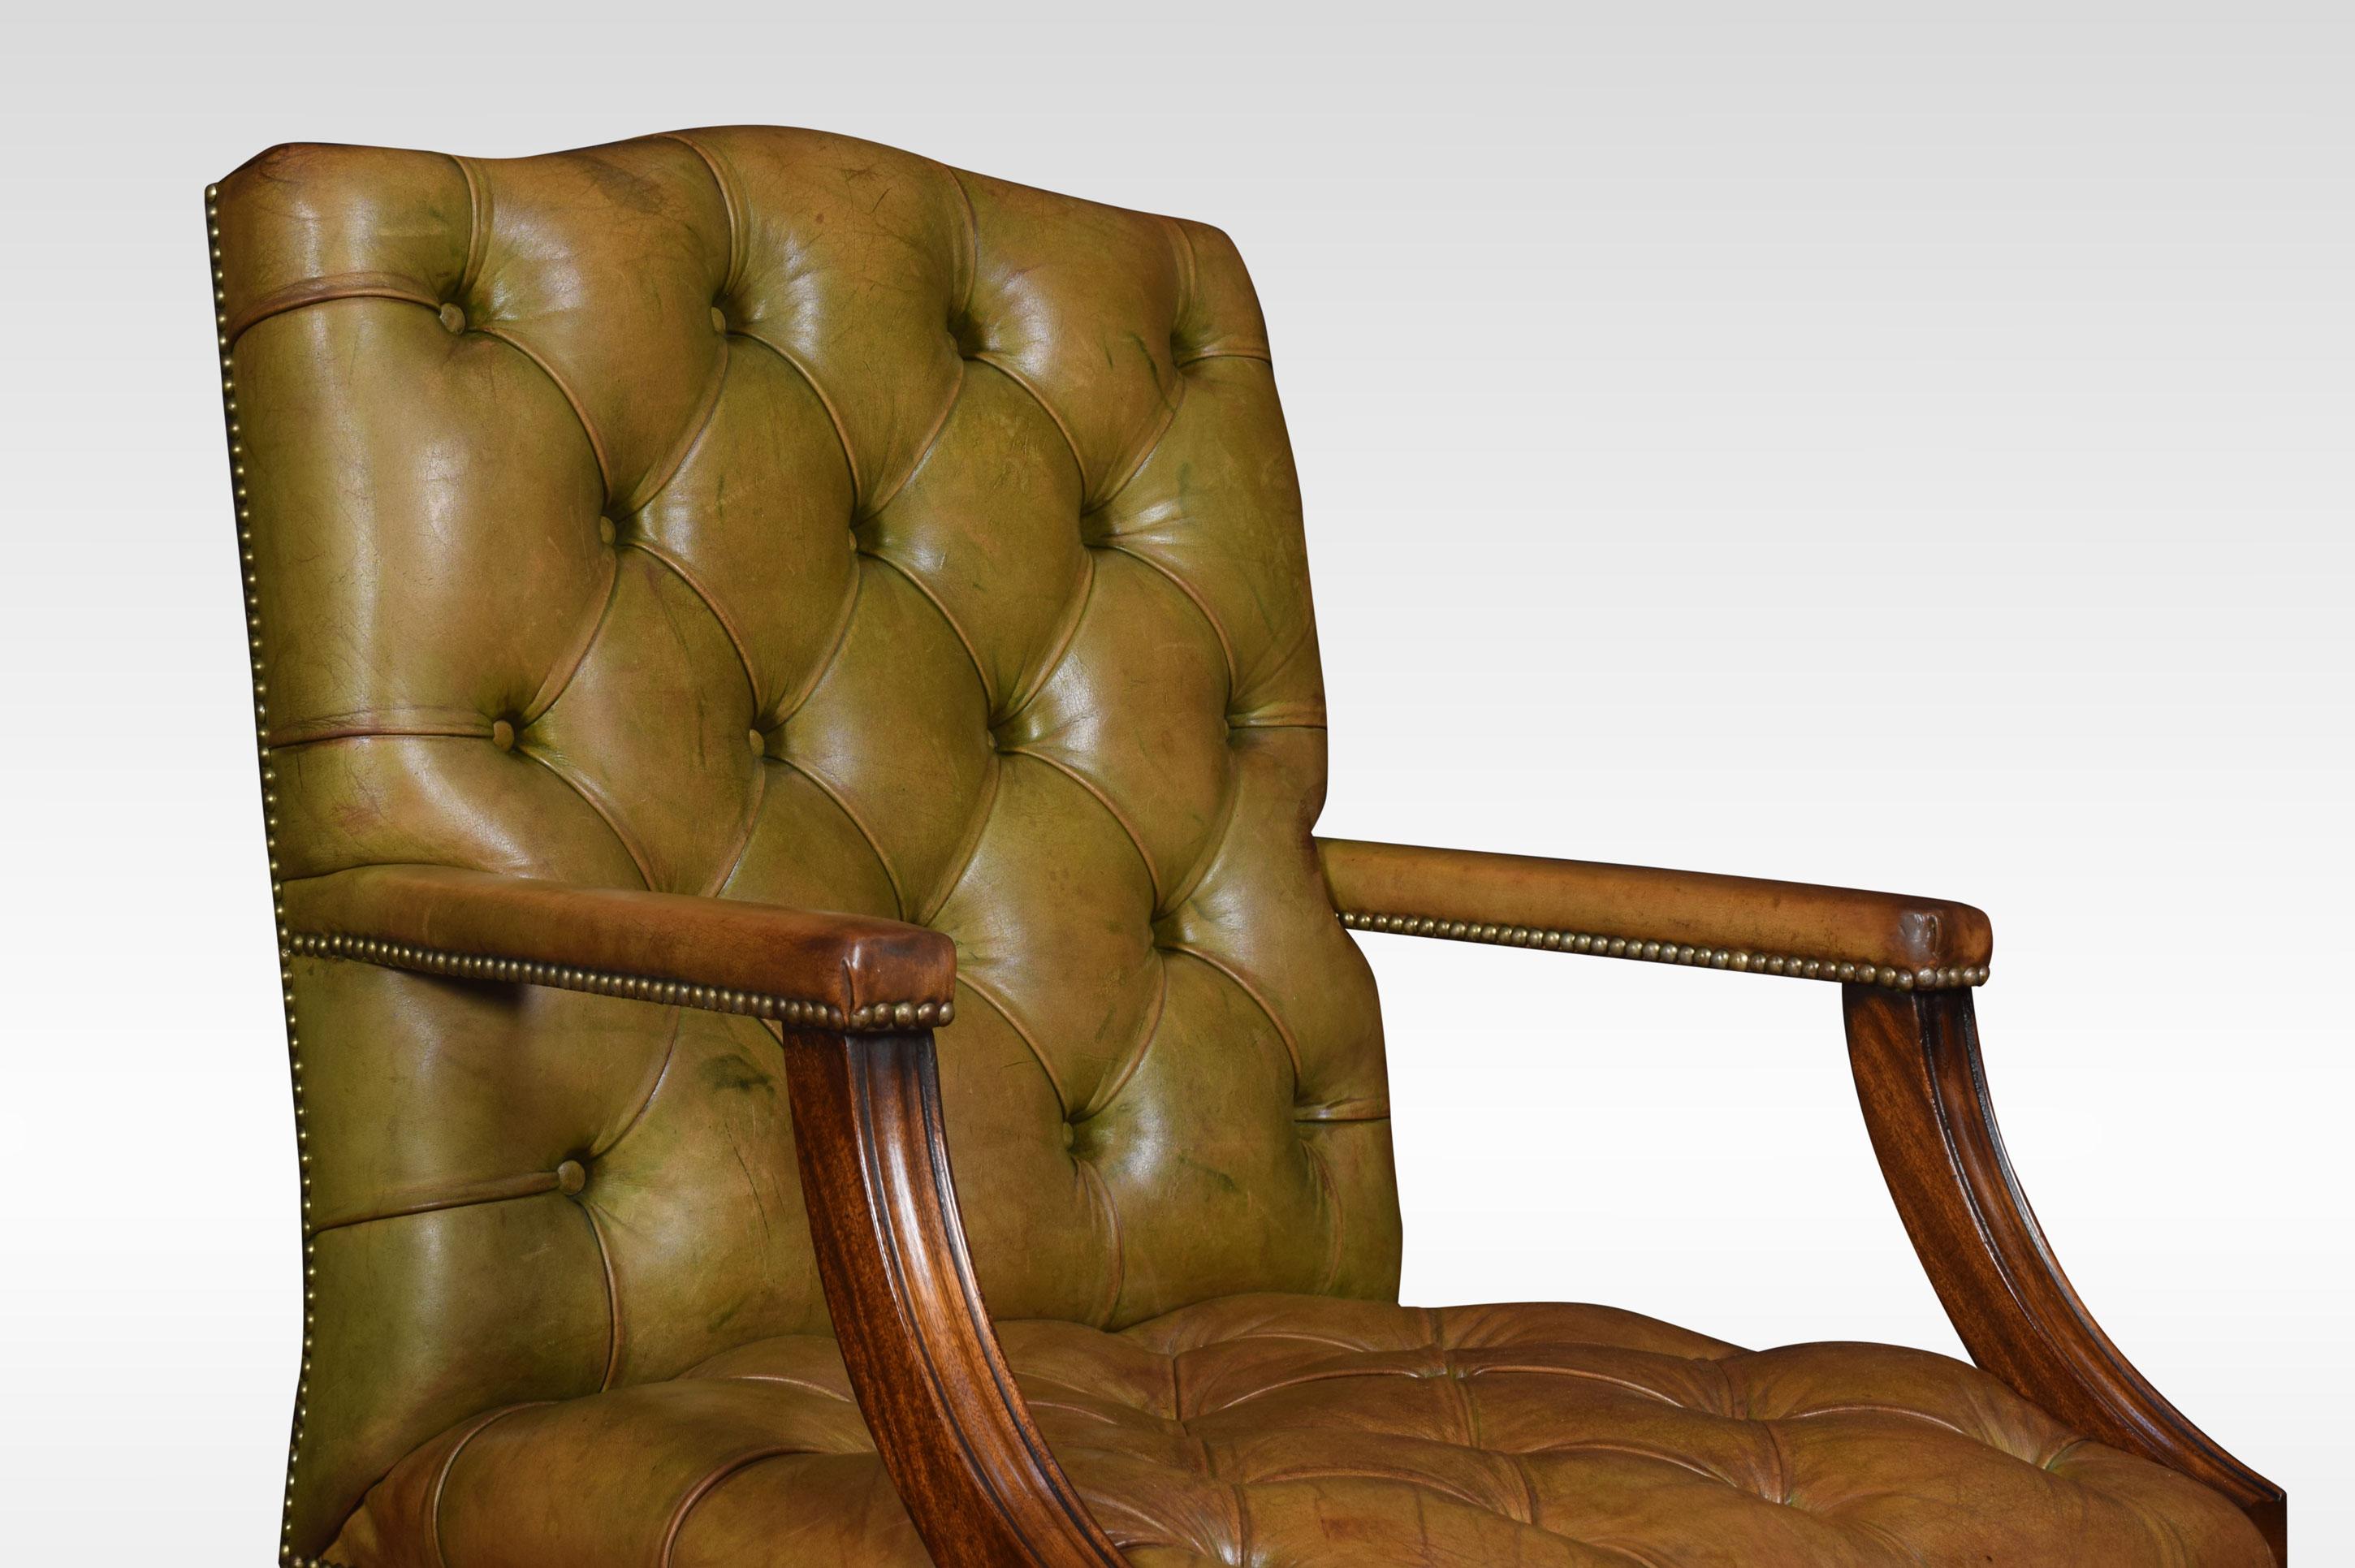 Georgian style leather Gainsborough library chair, having deep buttoned green leather back and seat with brass studded edges. The solid mahogany framed standing on square legs, united by stretcher.
Dimensions:
Height 39.5 inches, height to seat 18